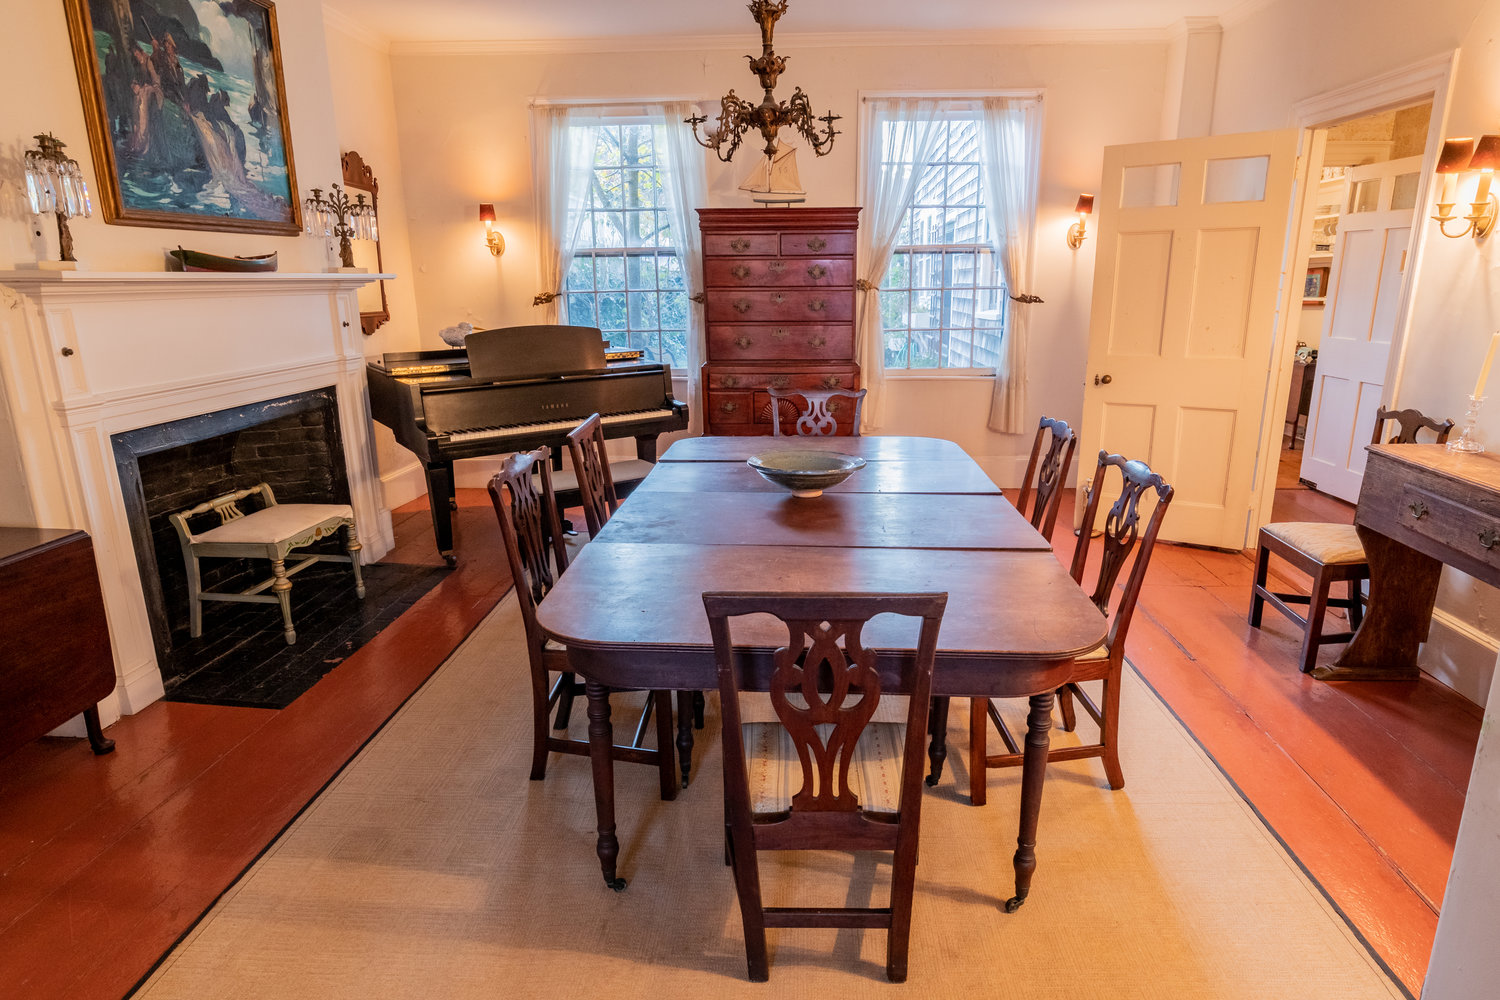 The dining room has antique wood floors, a fireplace and built-in cabinetry.